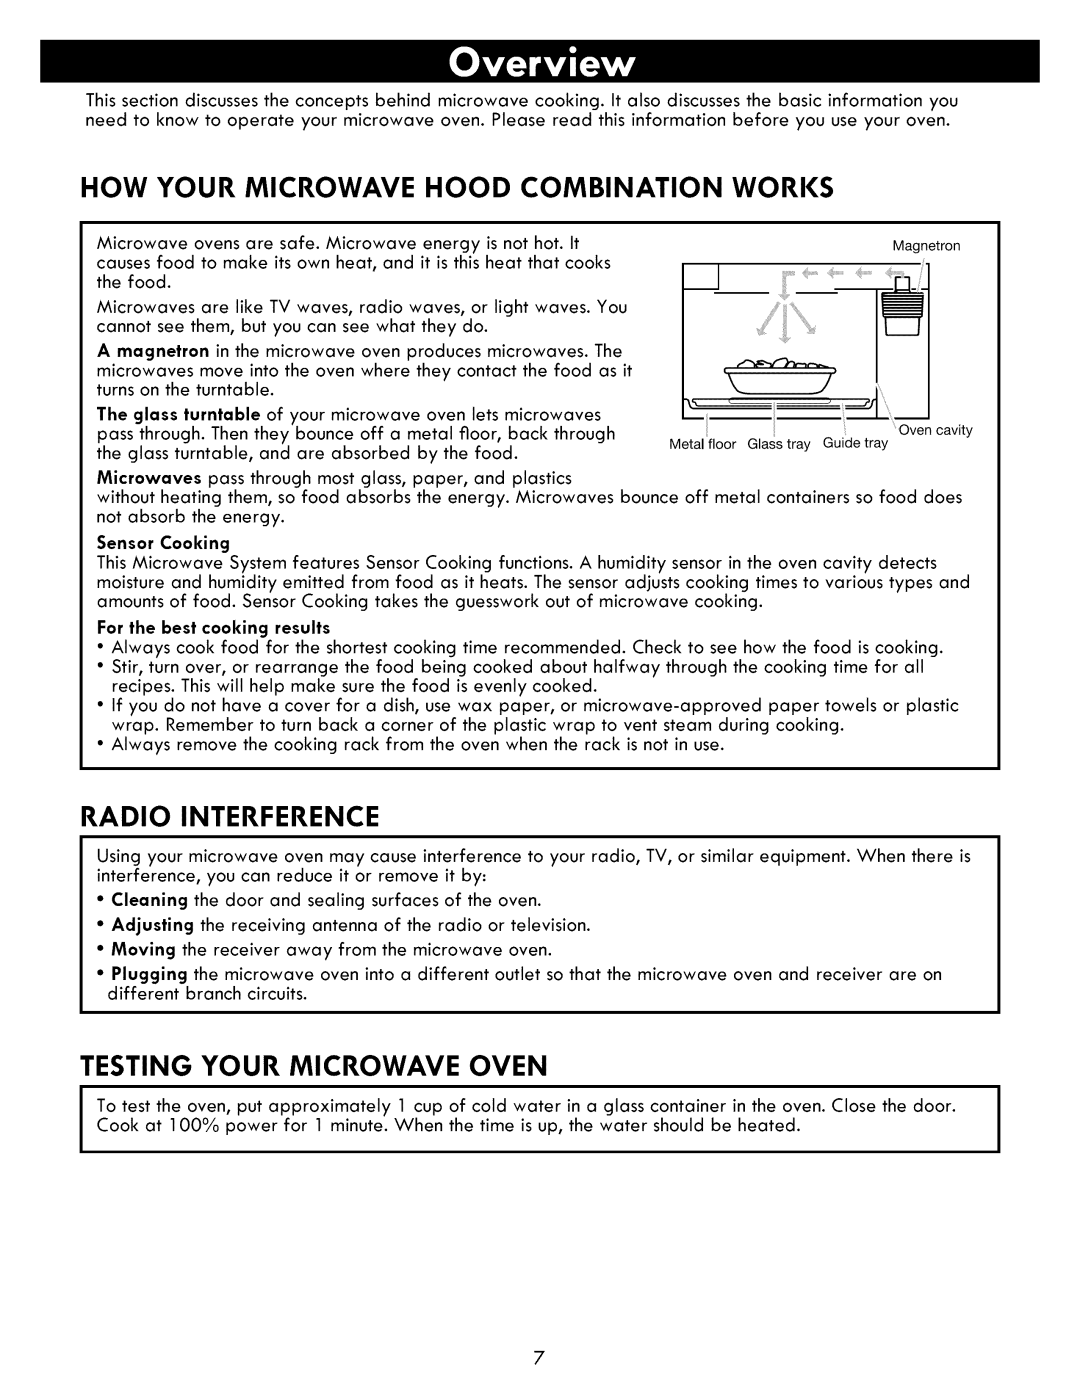 Kenmore 721.86002, 721.86009 How Your Microwave Hood Combination, Works, Radio Interference, Testing Your Microwave, Oven 